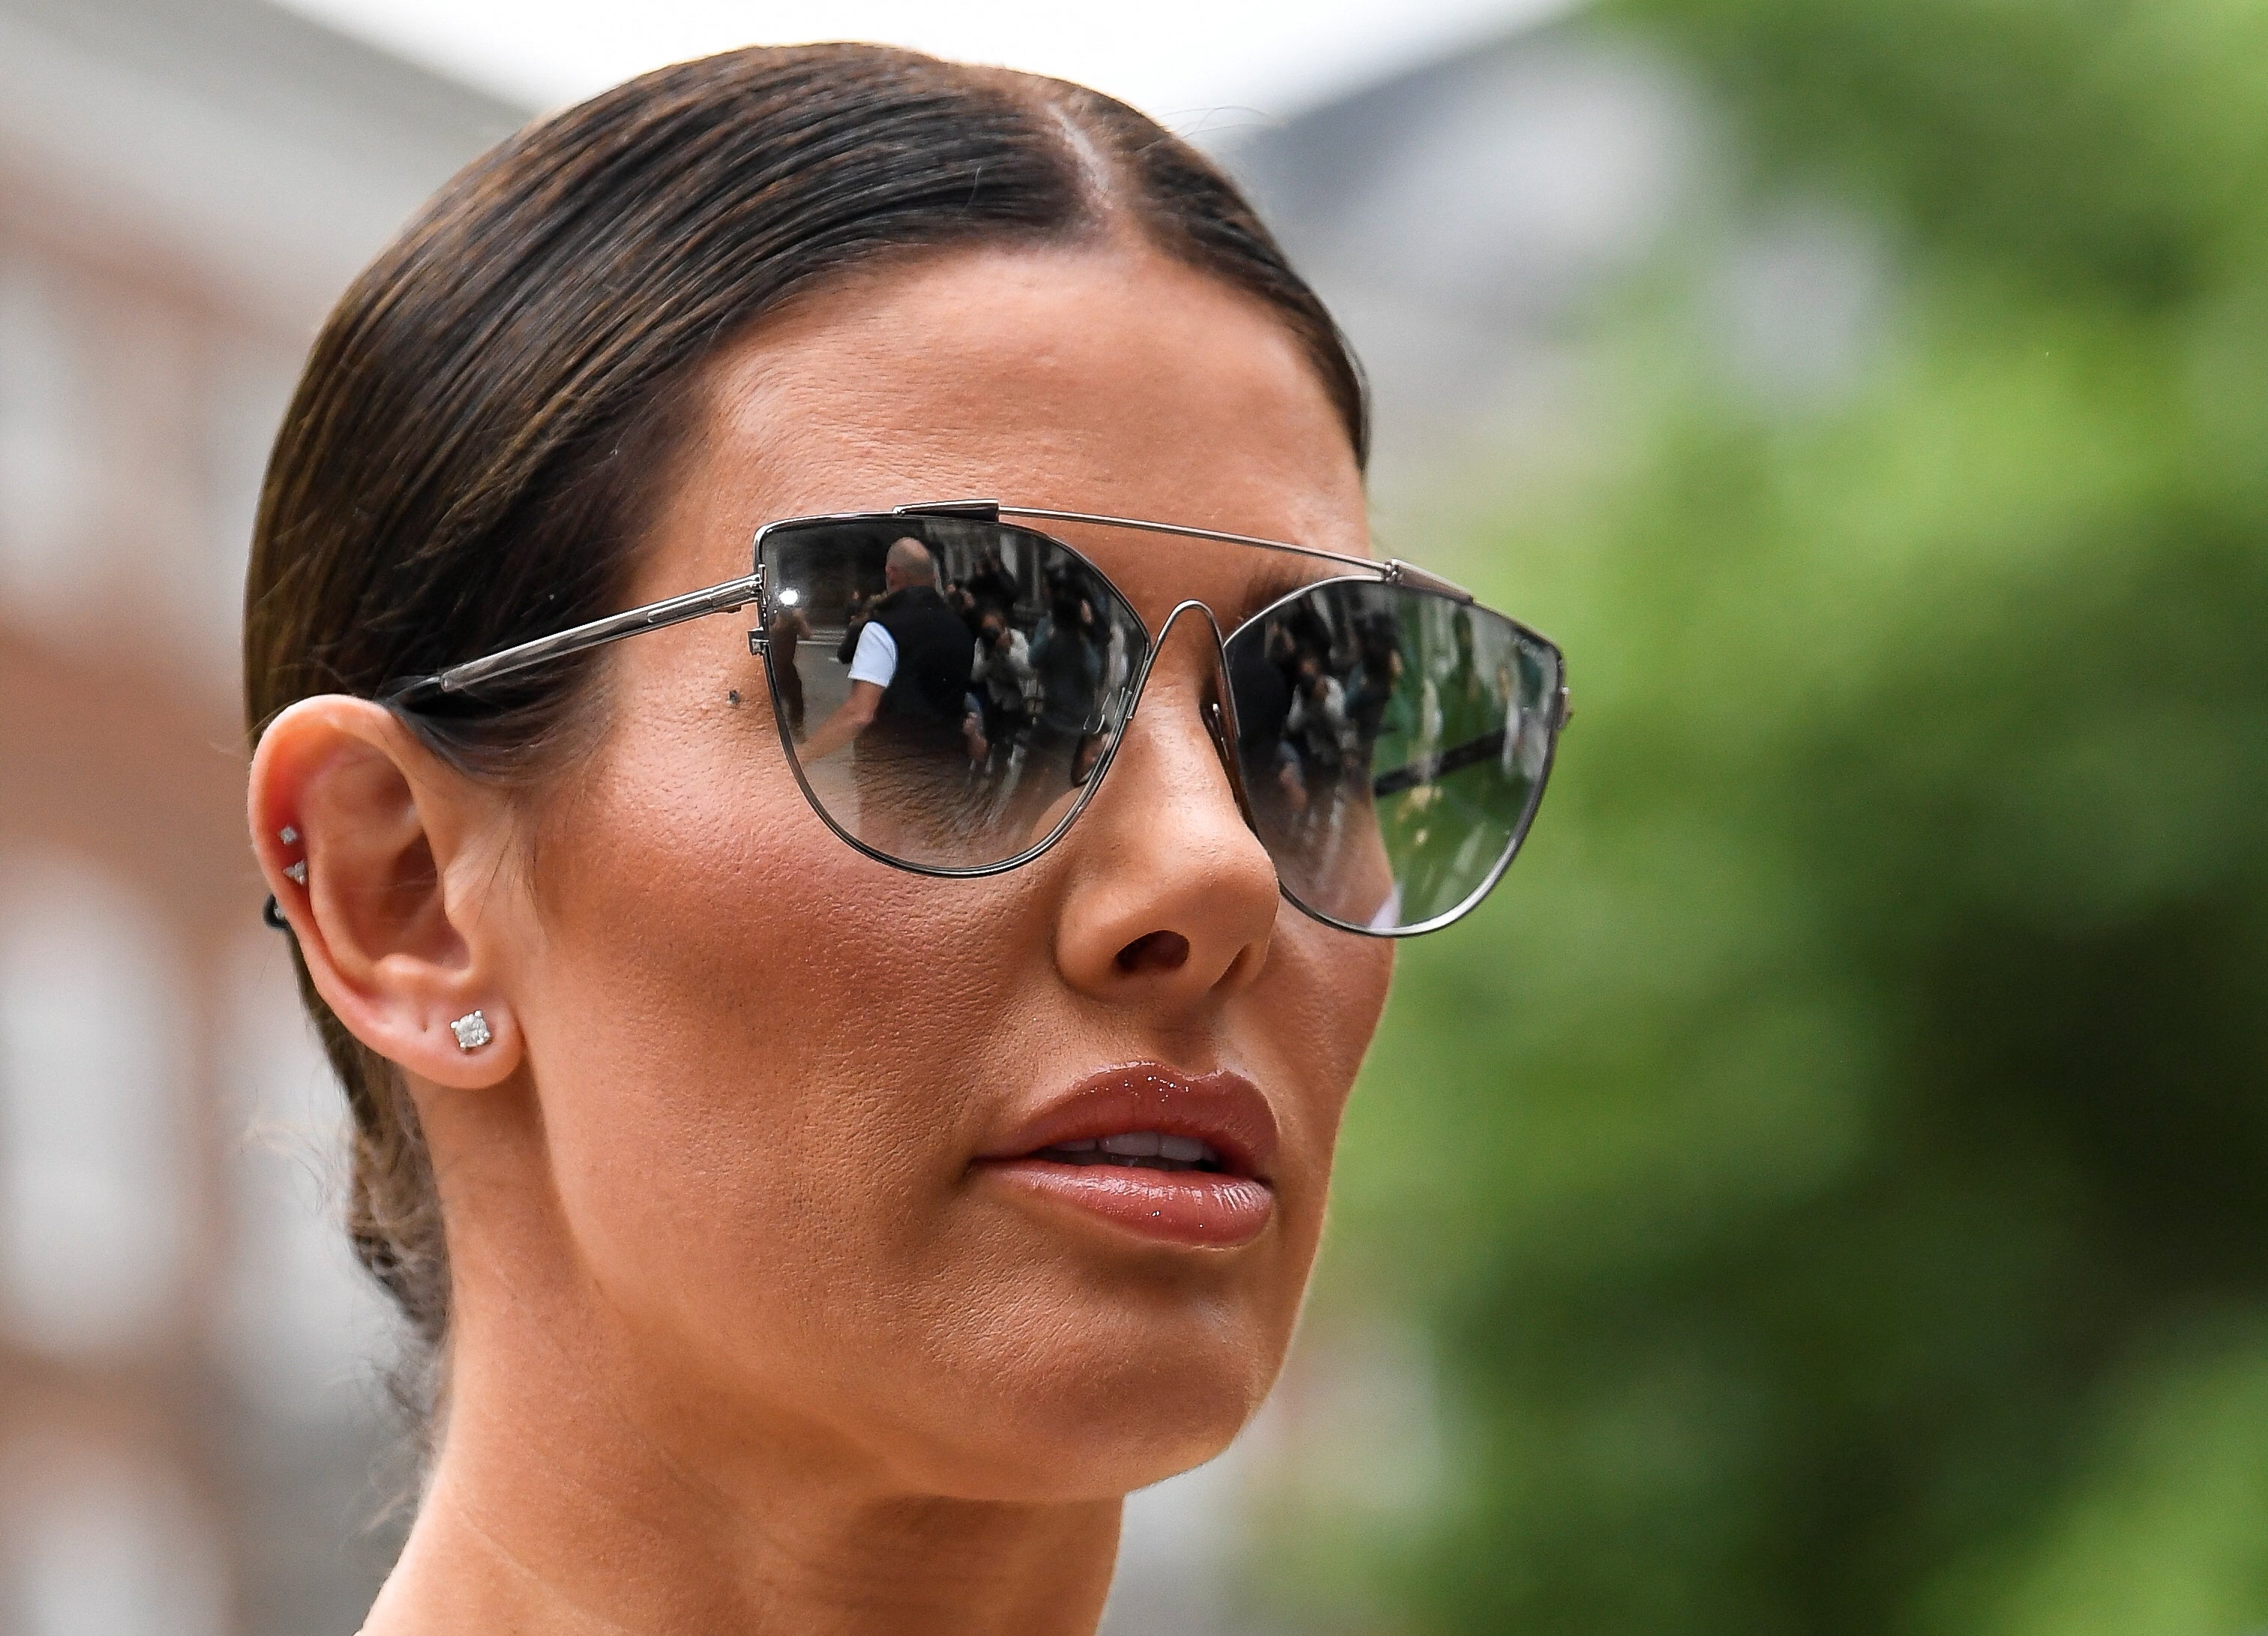 Rebekah Vardy denied leaking information about Coleen Rooney to the press